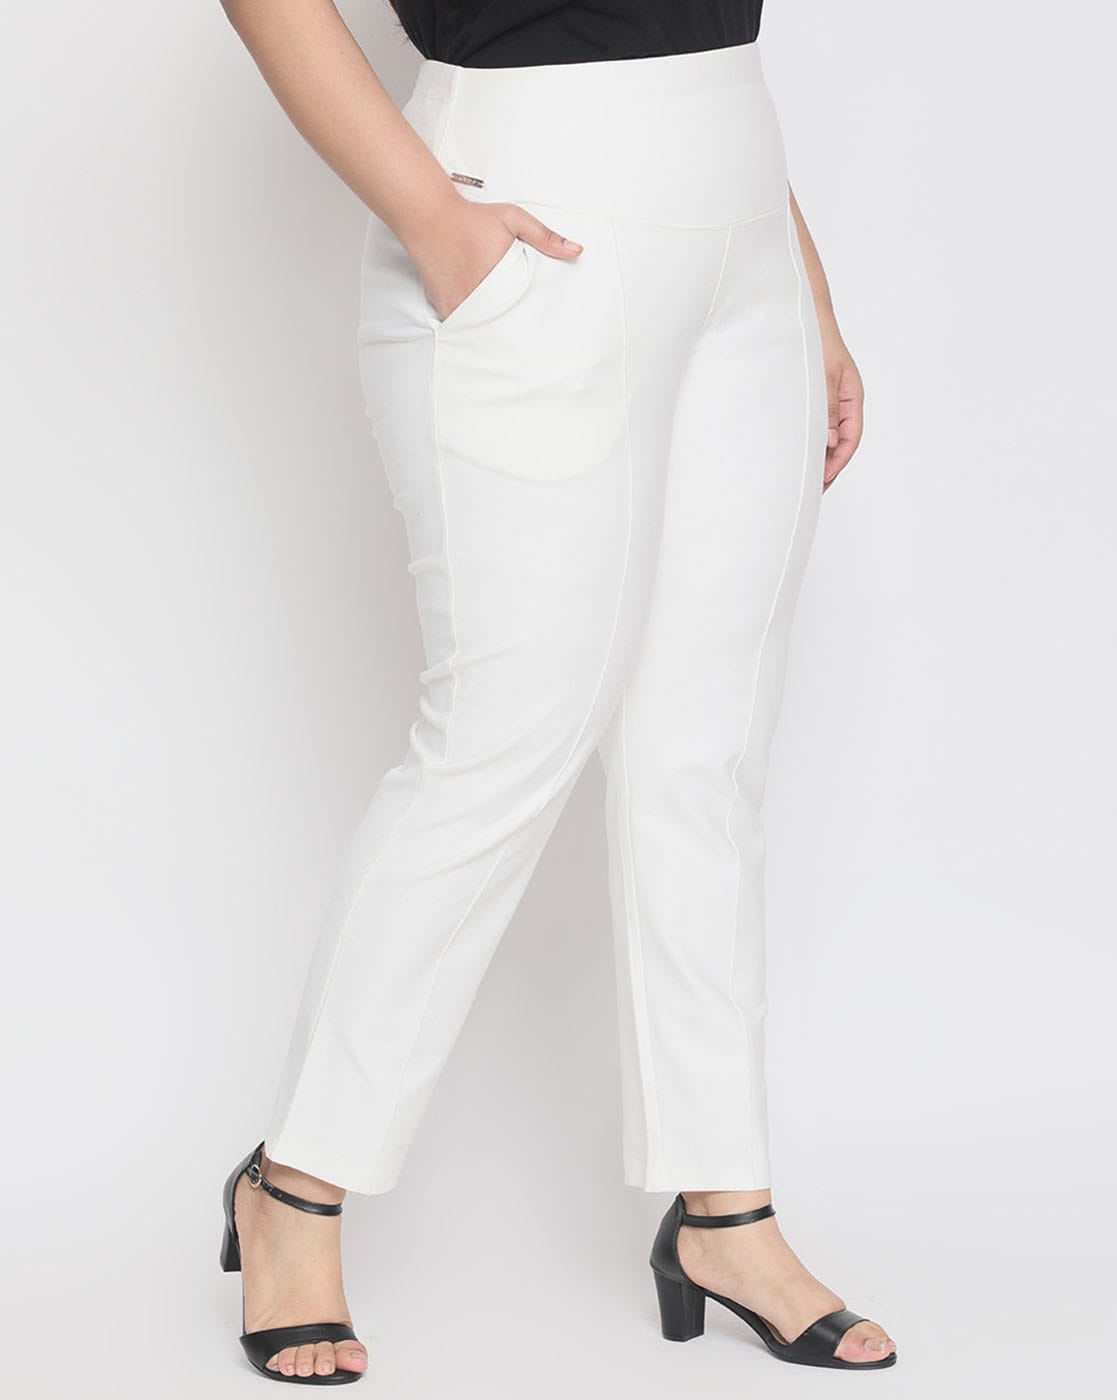 How To Style White Jeans In 2023 - 50 IS NOT OLD - A Fashion And Beauty  Blog For Women Over 50